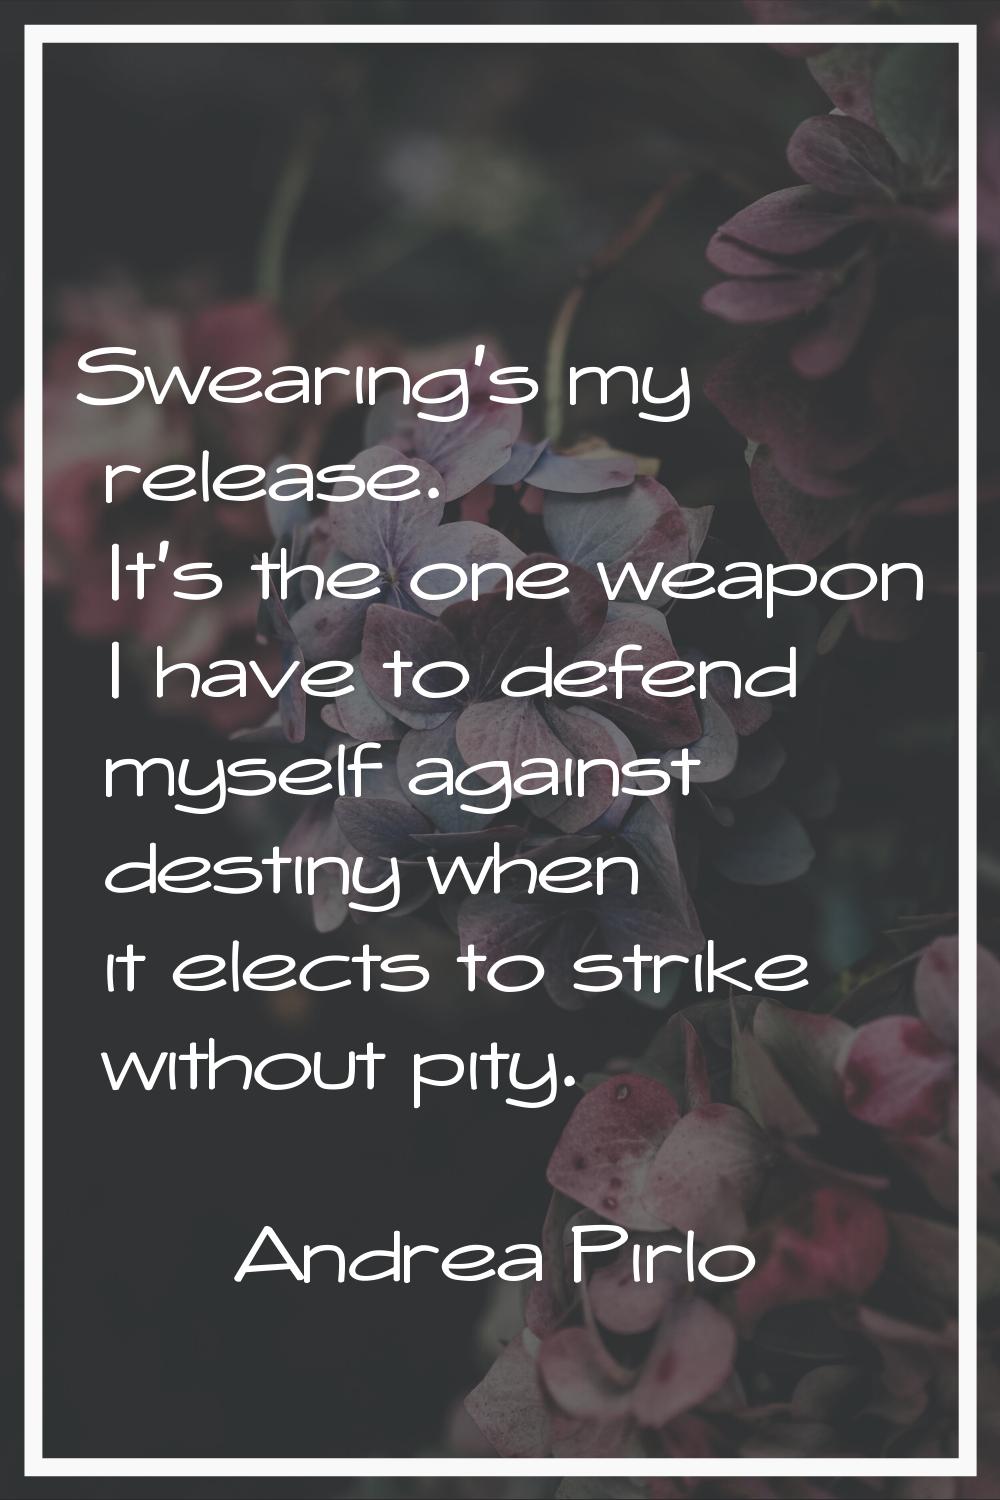 Swearing's my release. It's the one weapon I have to defend myself against destiny when it elects t